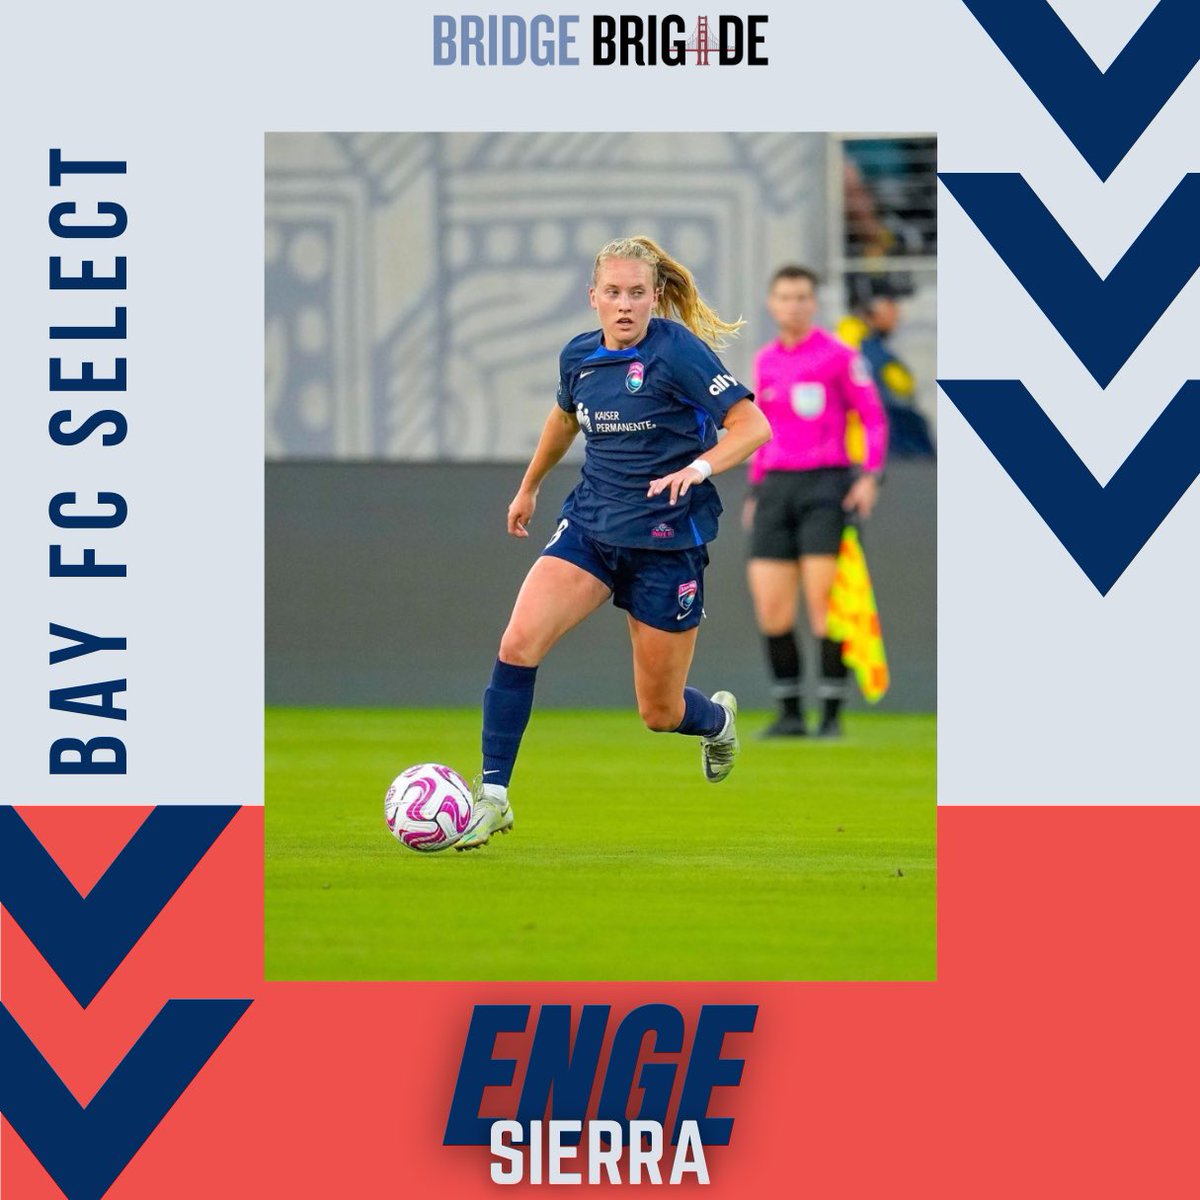 With the final pick of the Expansion Draft, @wearebayfc select Sierra Enge from @sandiegowavefc. Welcome back to the Bay, @sierraenge! 

#bridgebrigade #bayfc #nwsl